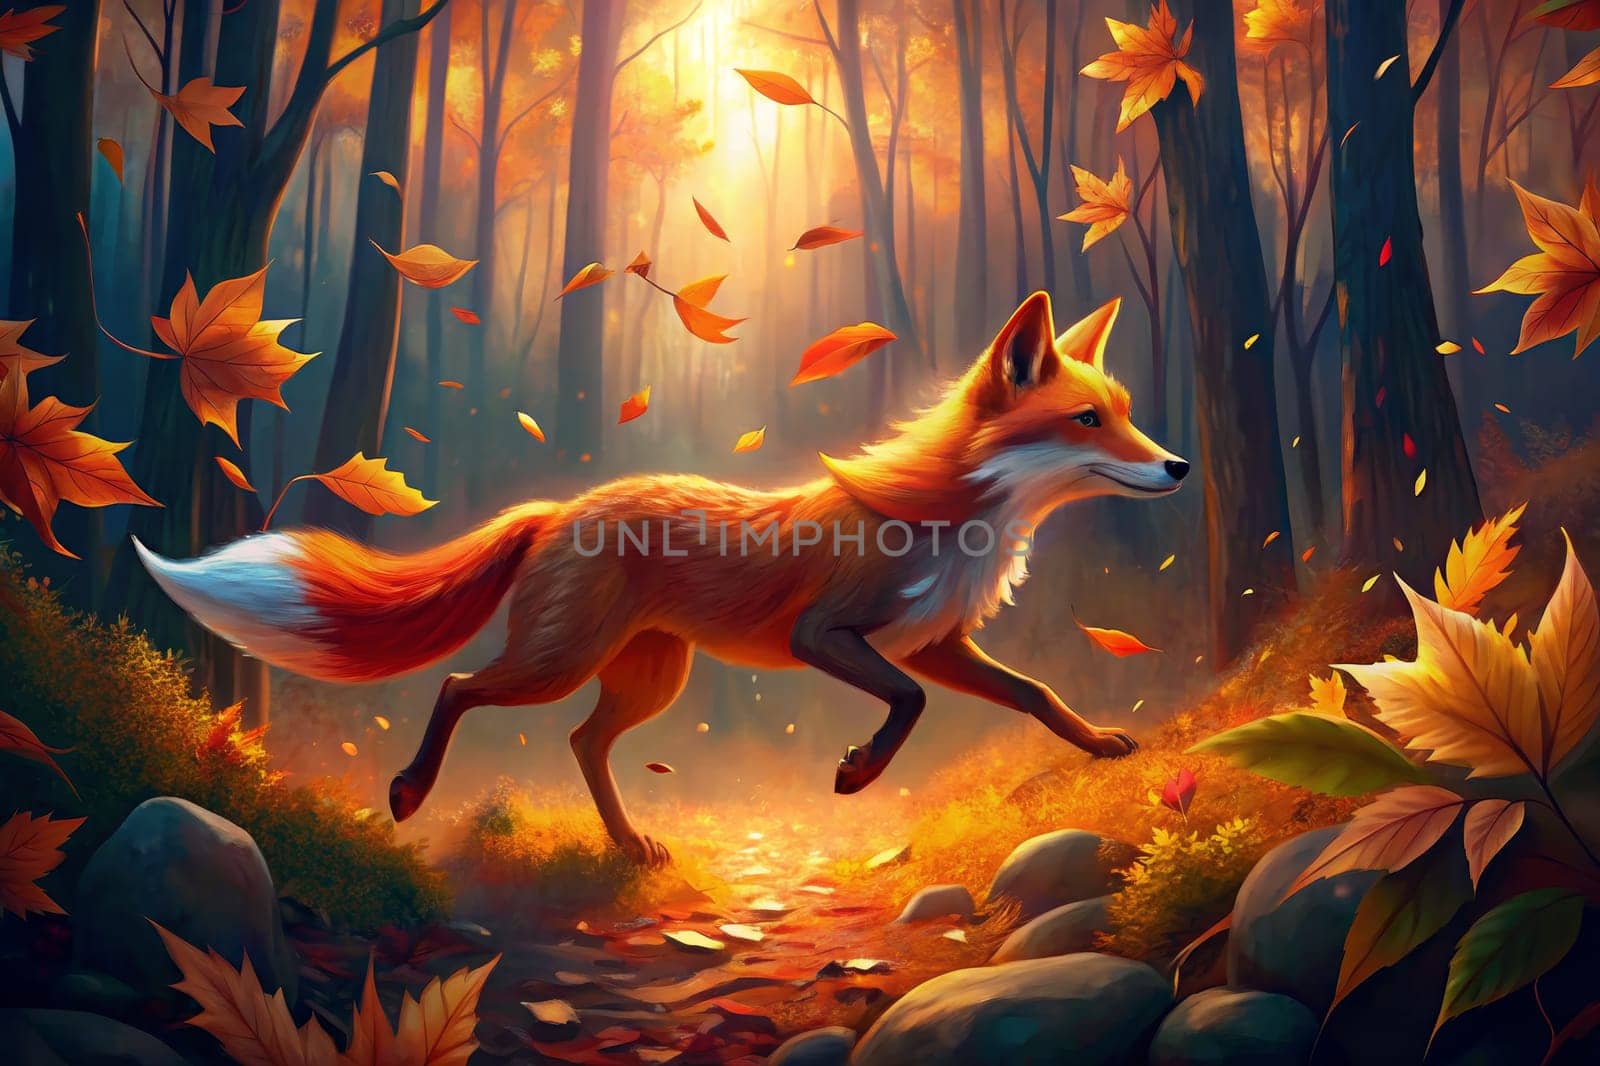 A red fox with a white tipped tail runs through a forest path, bathed in the golden light of the setting sun. Fallen autumn leaves scatter around the fox, and more leaves fall from the trees.